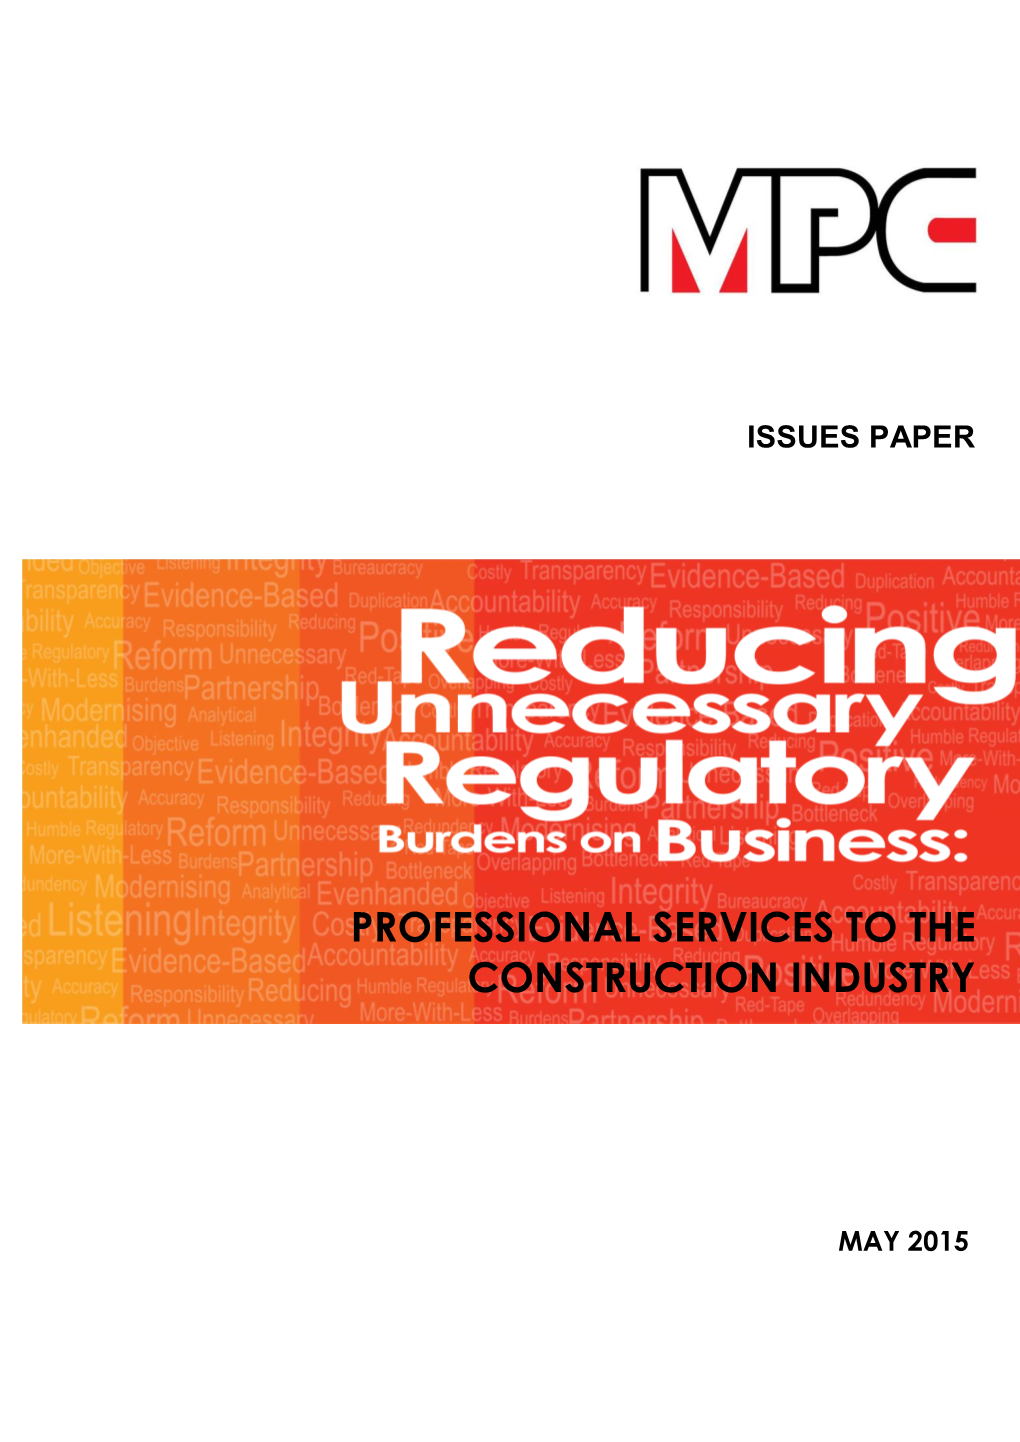 Professional-Services-Issues-Paper-1